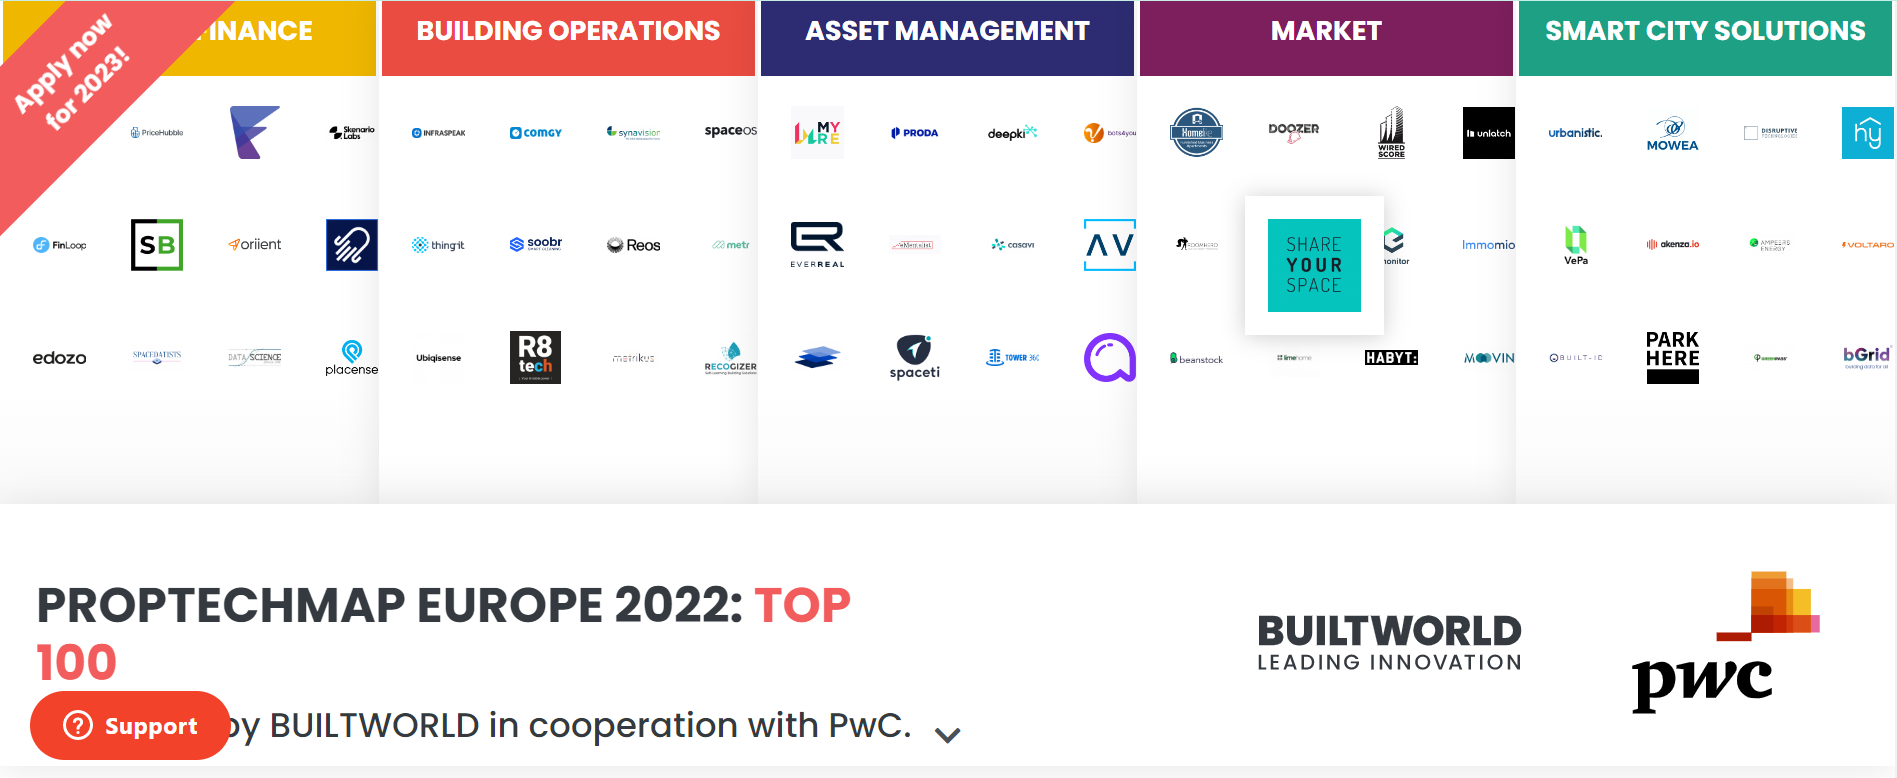 proptechmap-europe-2022